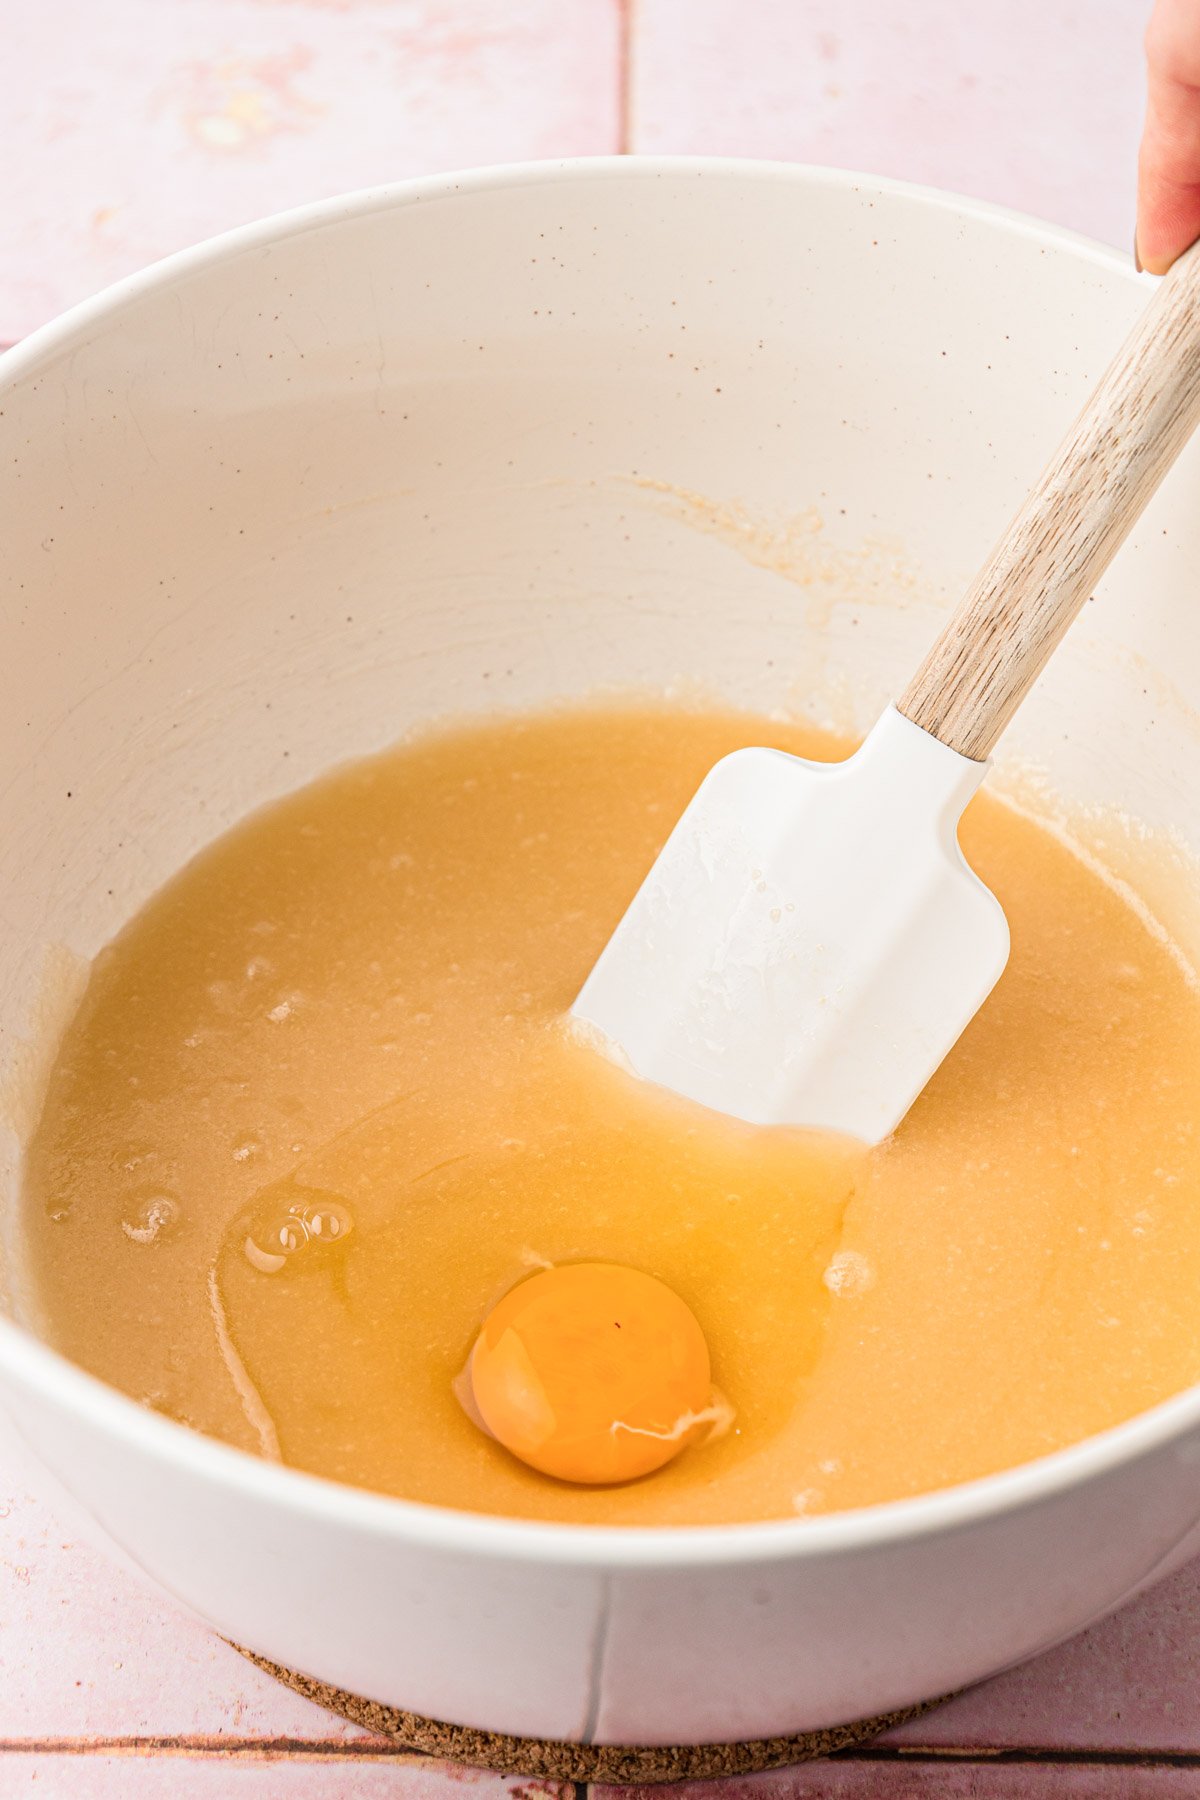 Egg being added to a melted butter and sugar mixture in a bowl.